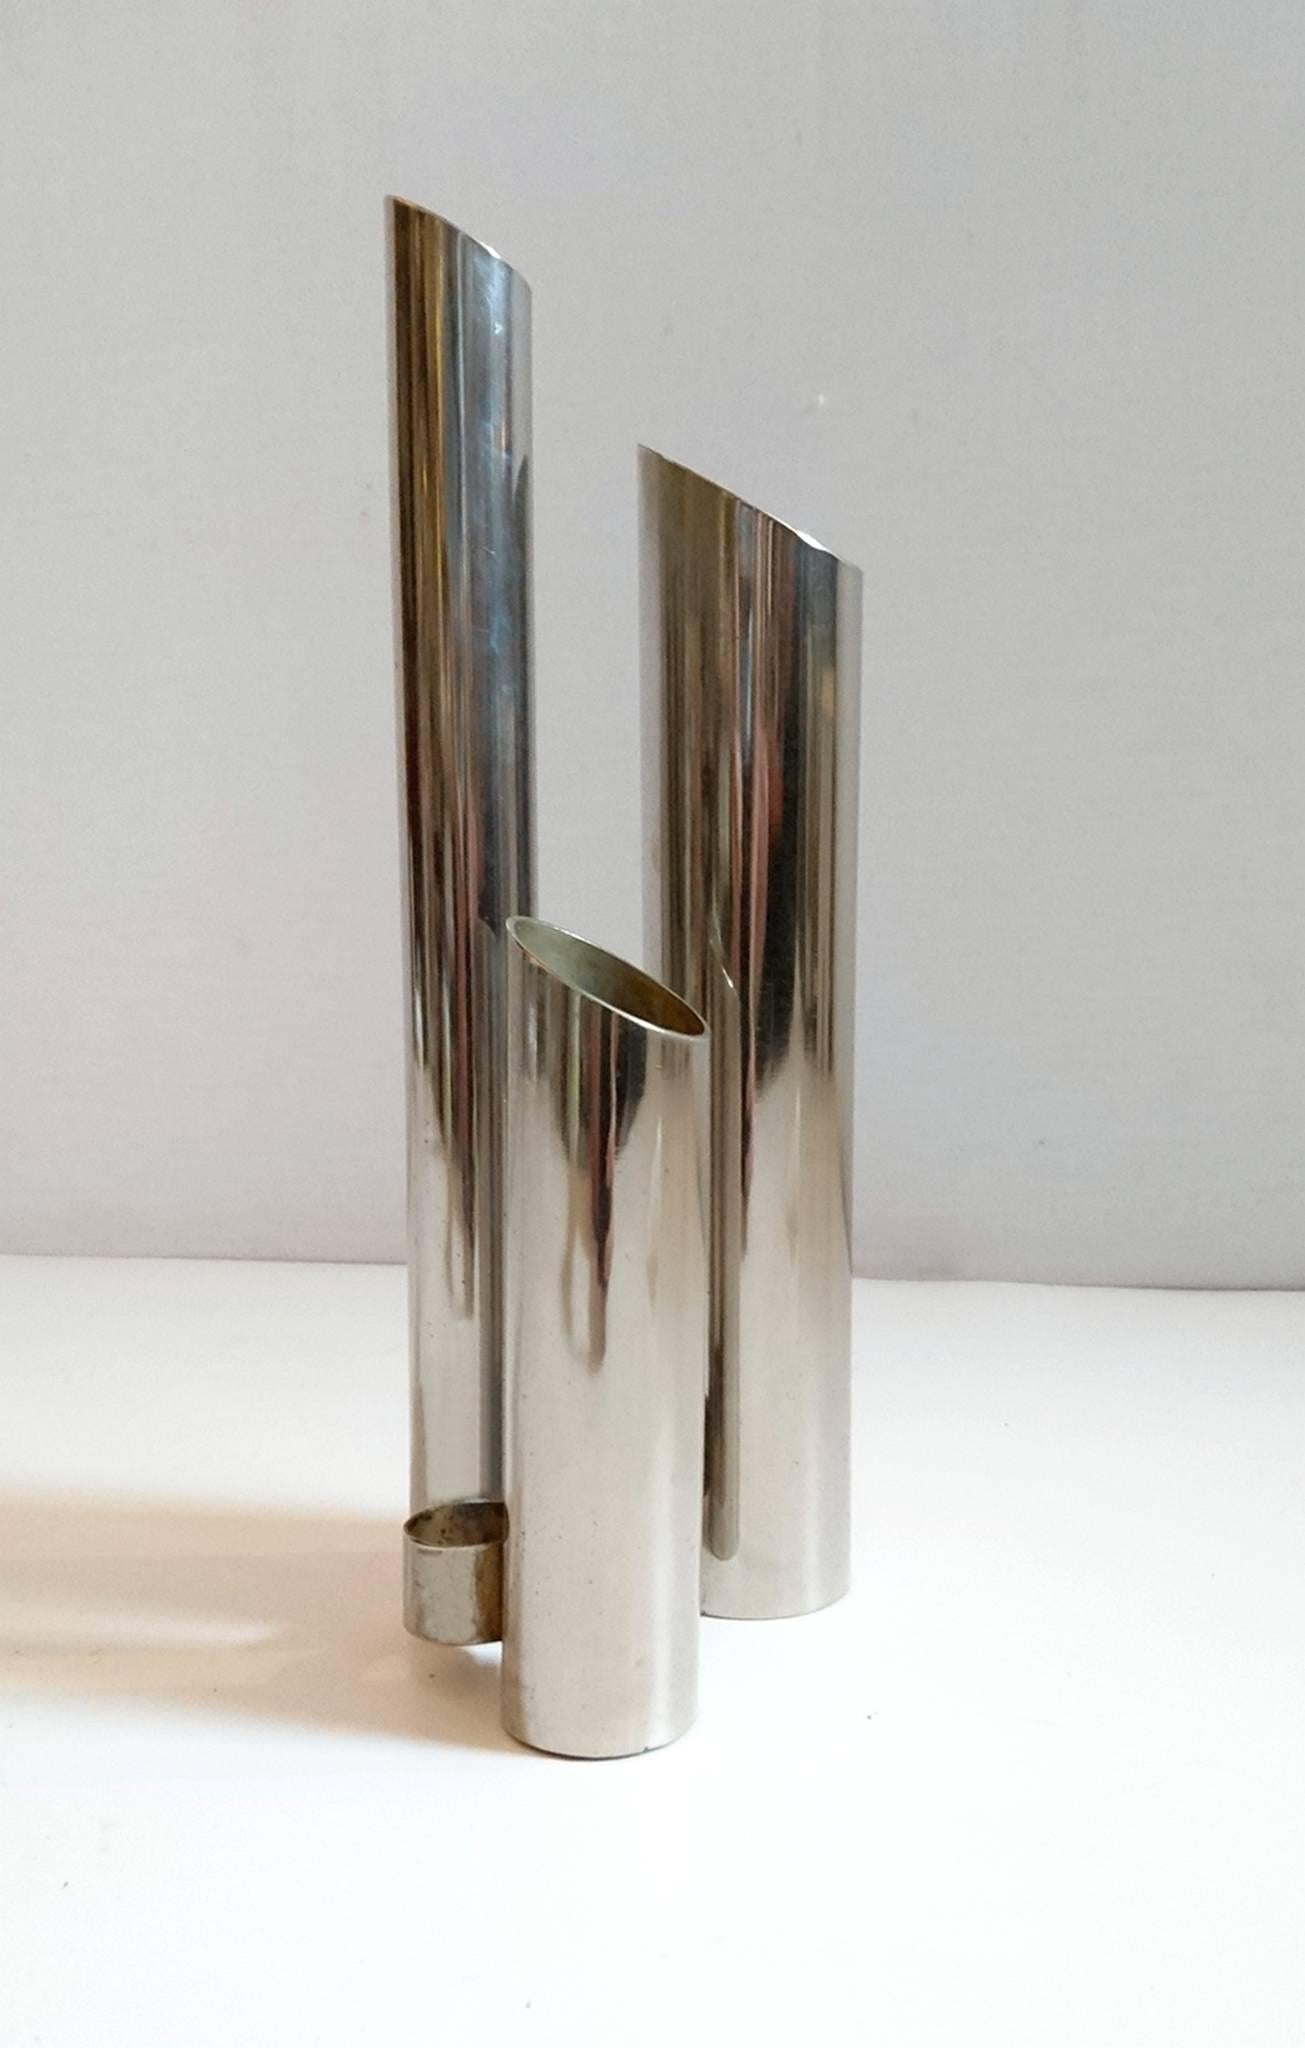 Mid century modern space age vase in chrome with three tubes for flowers in the manner of Gio Ponti. 